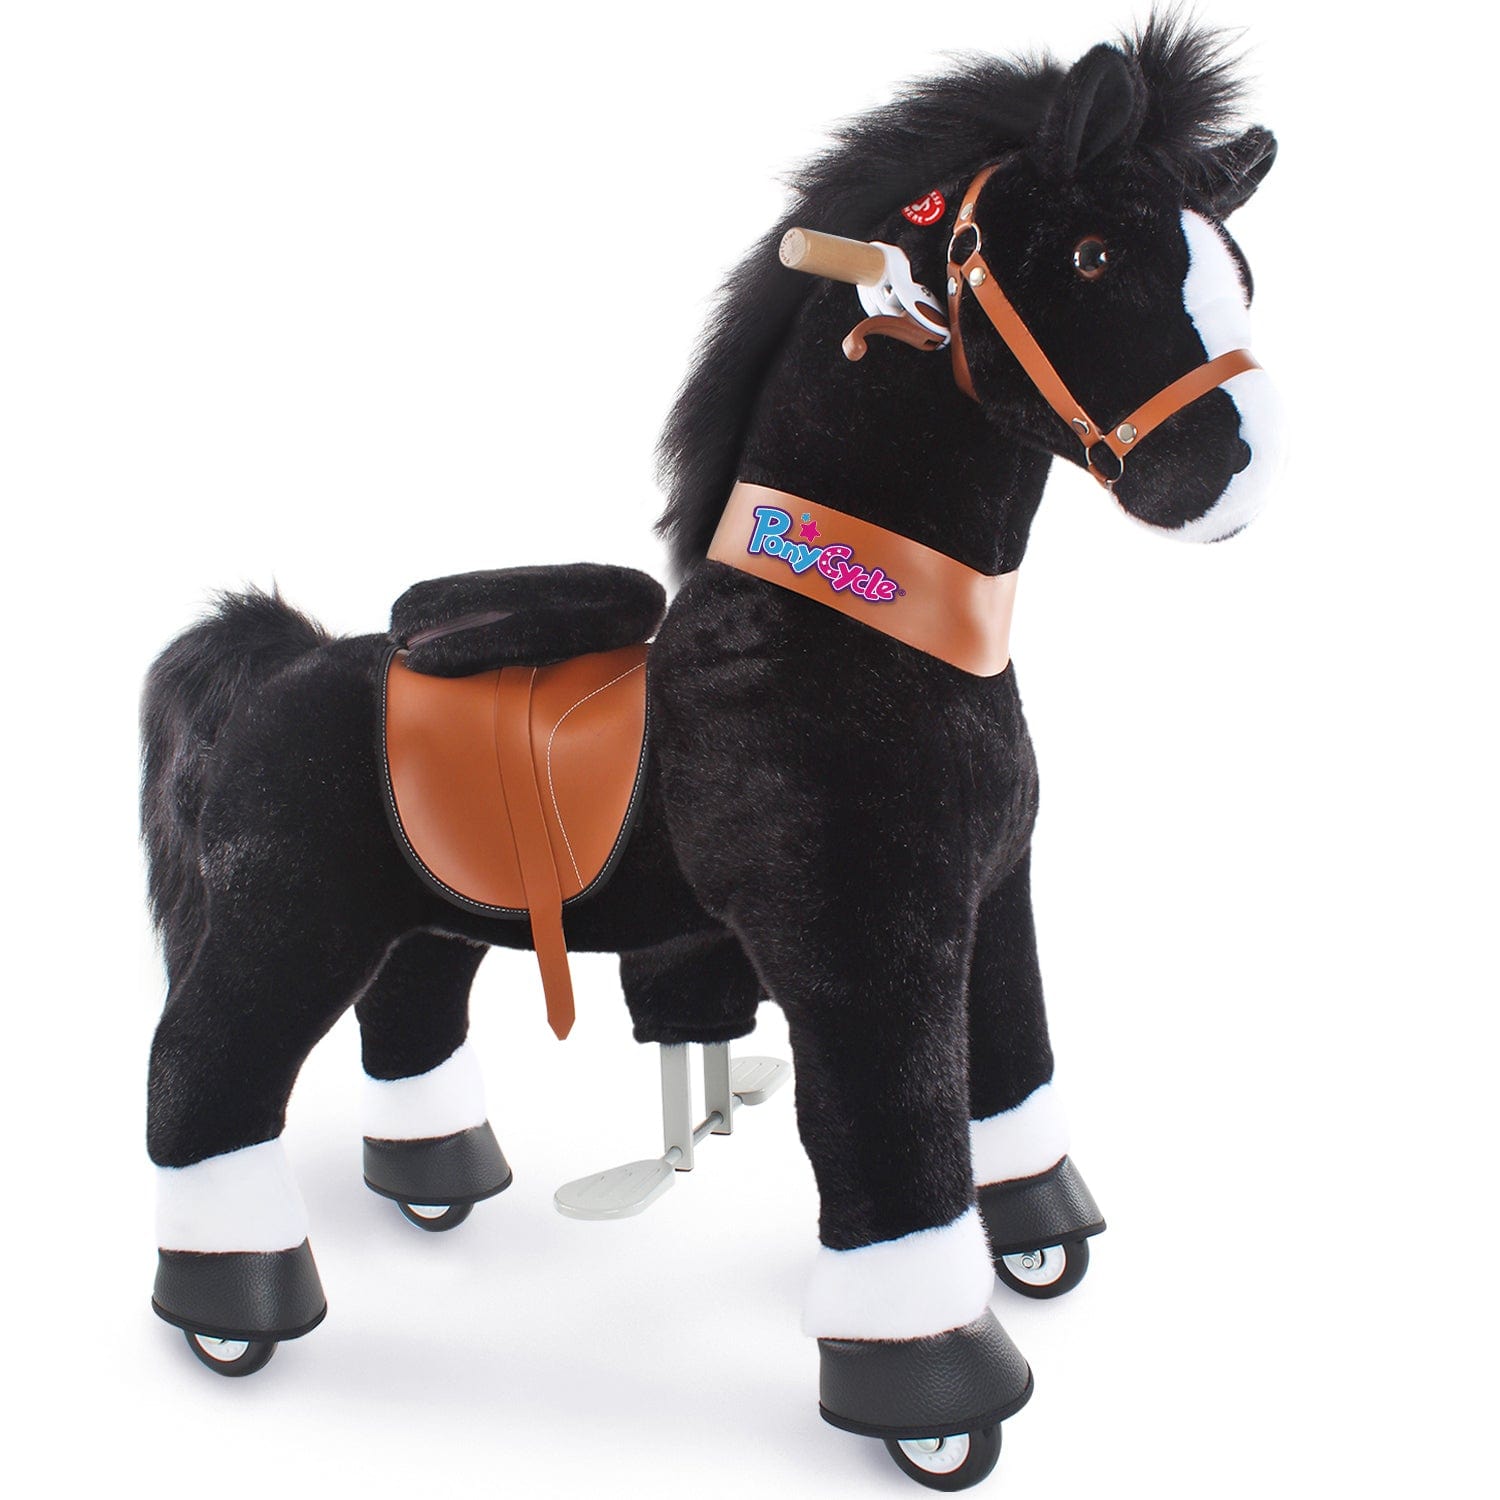 PonyCycle, Inc. ride on horse Black / Size 3 for Age 3-5 Ride on Horse